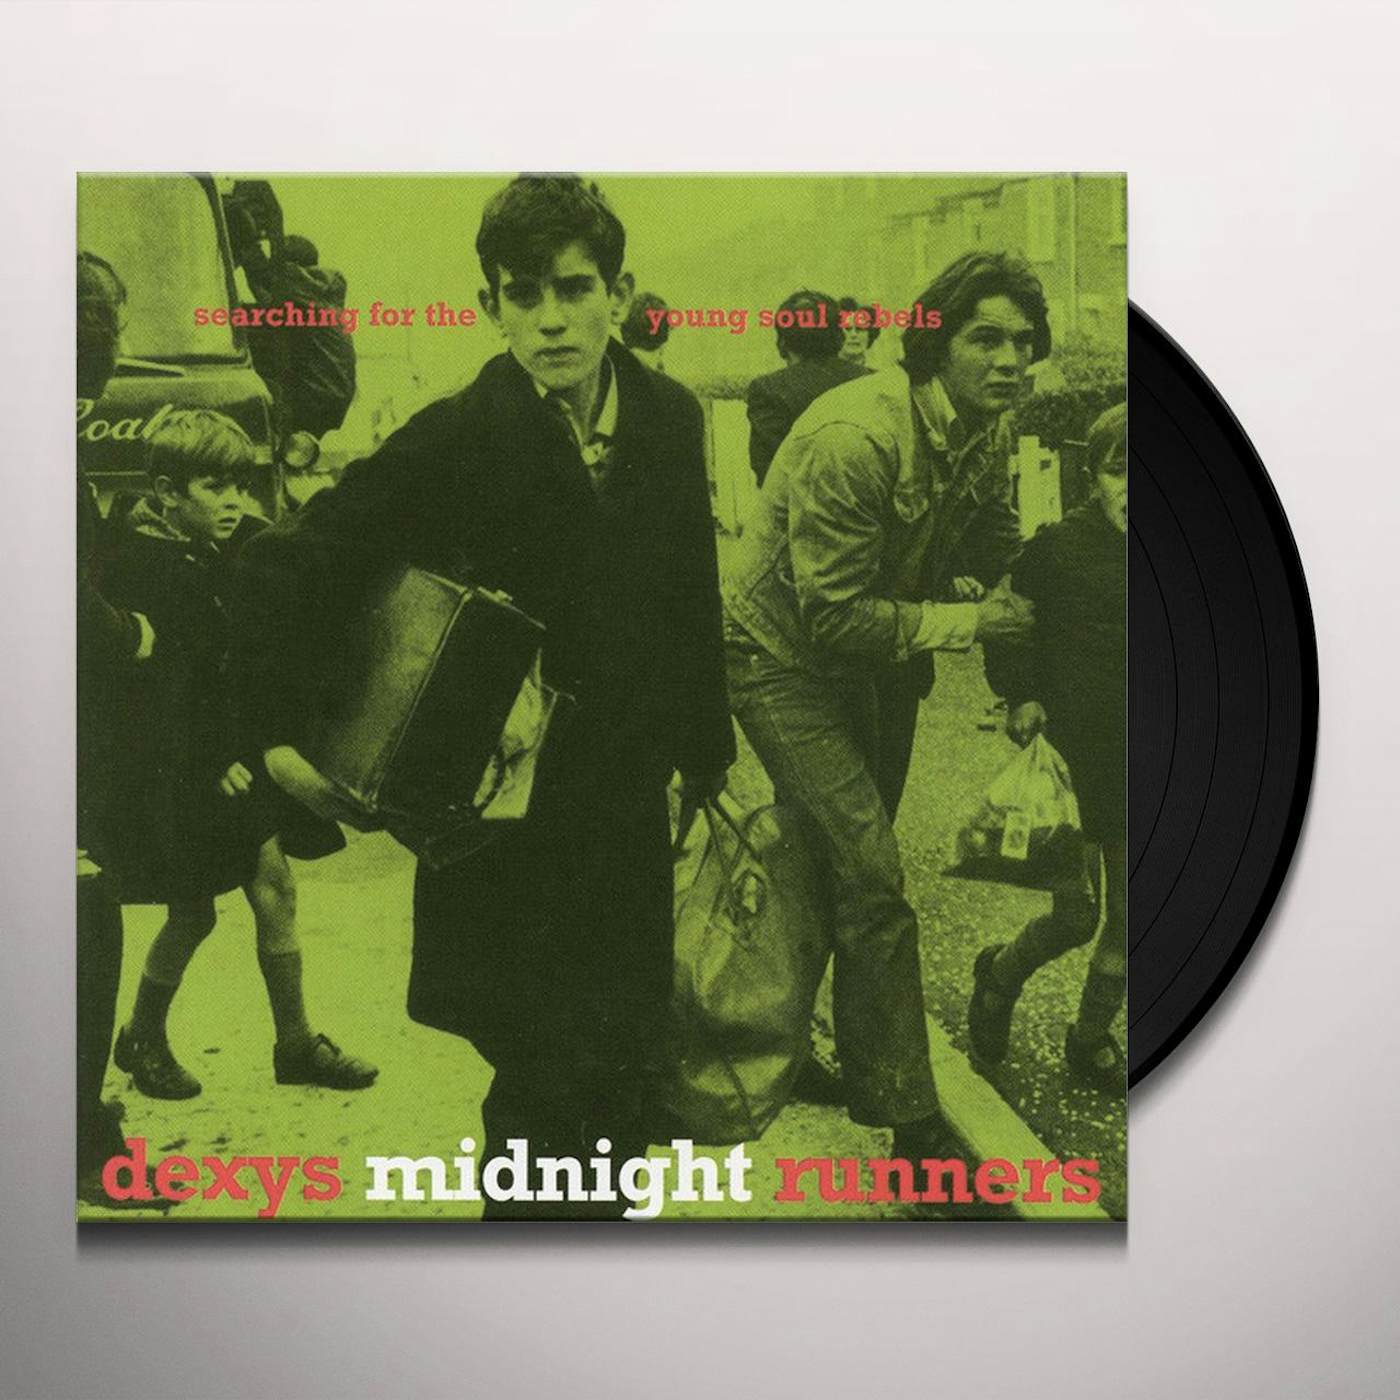 Dexy'S Midnight Runners Searching For The Young Soul Rebels Vinyl Record